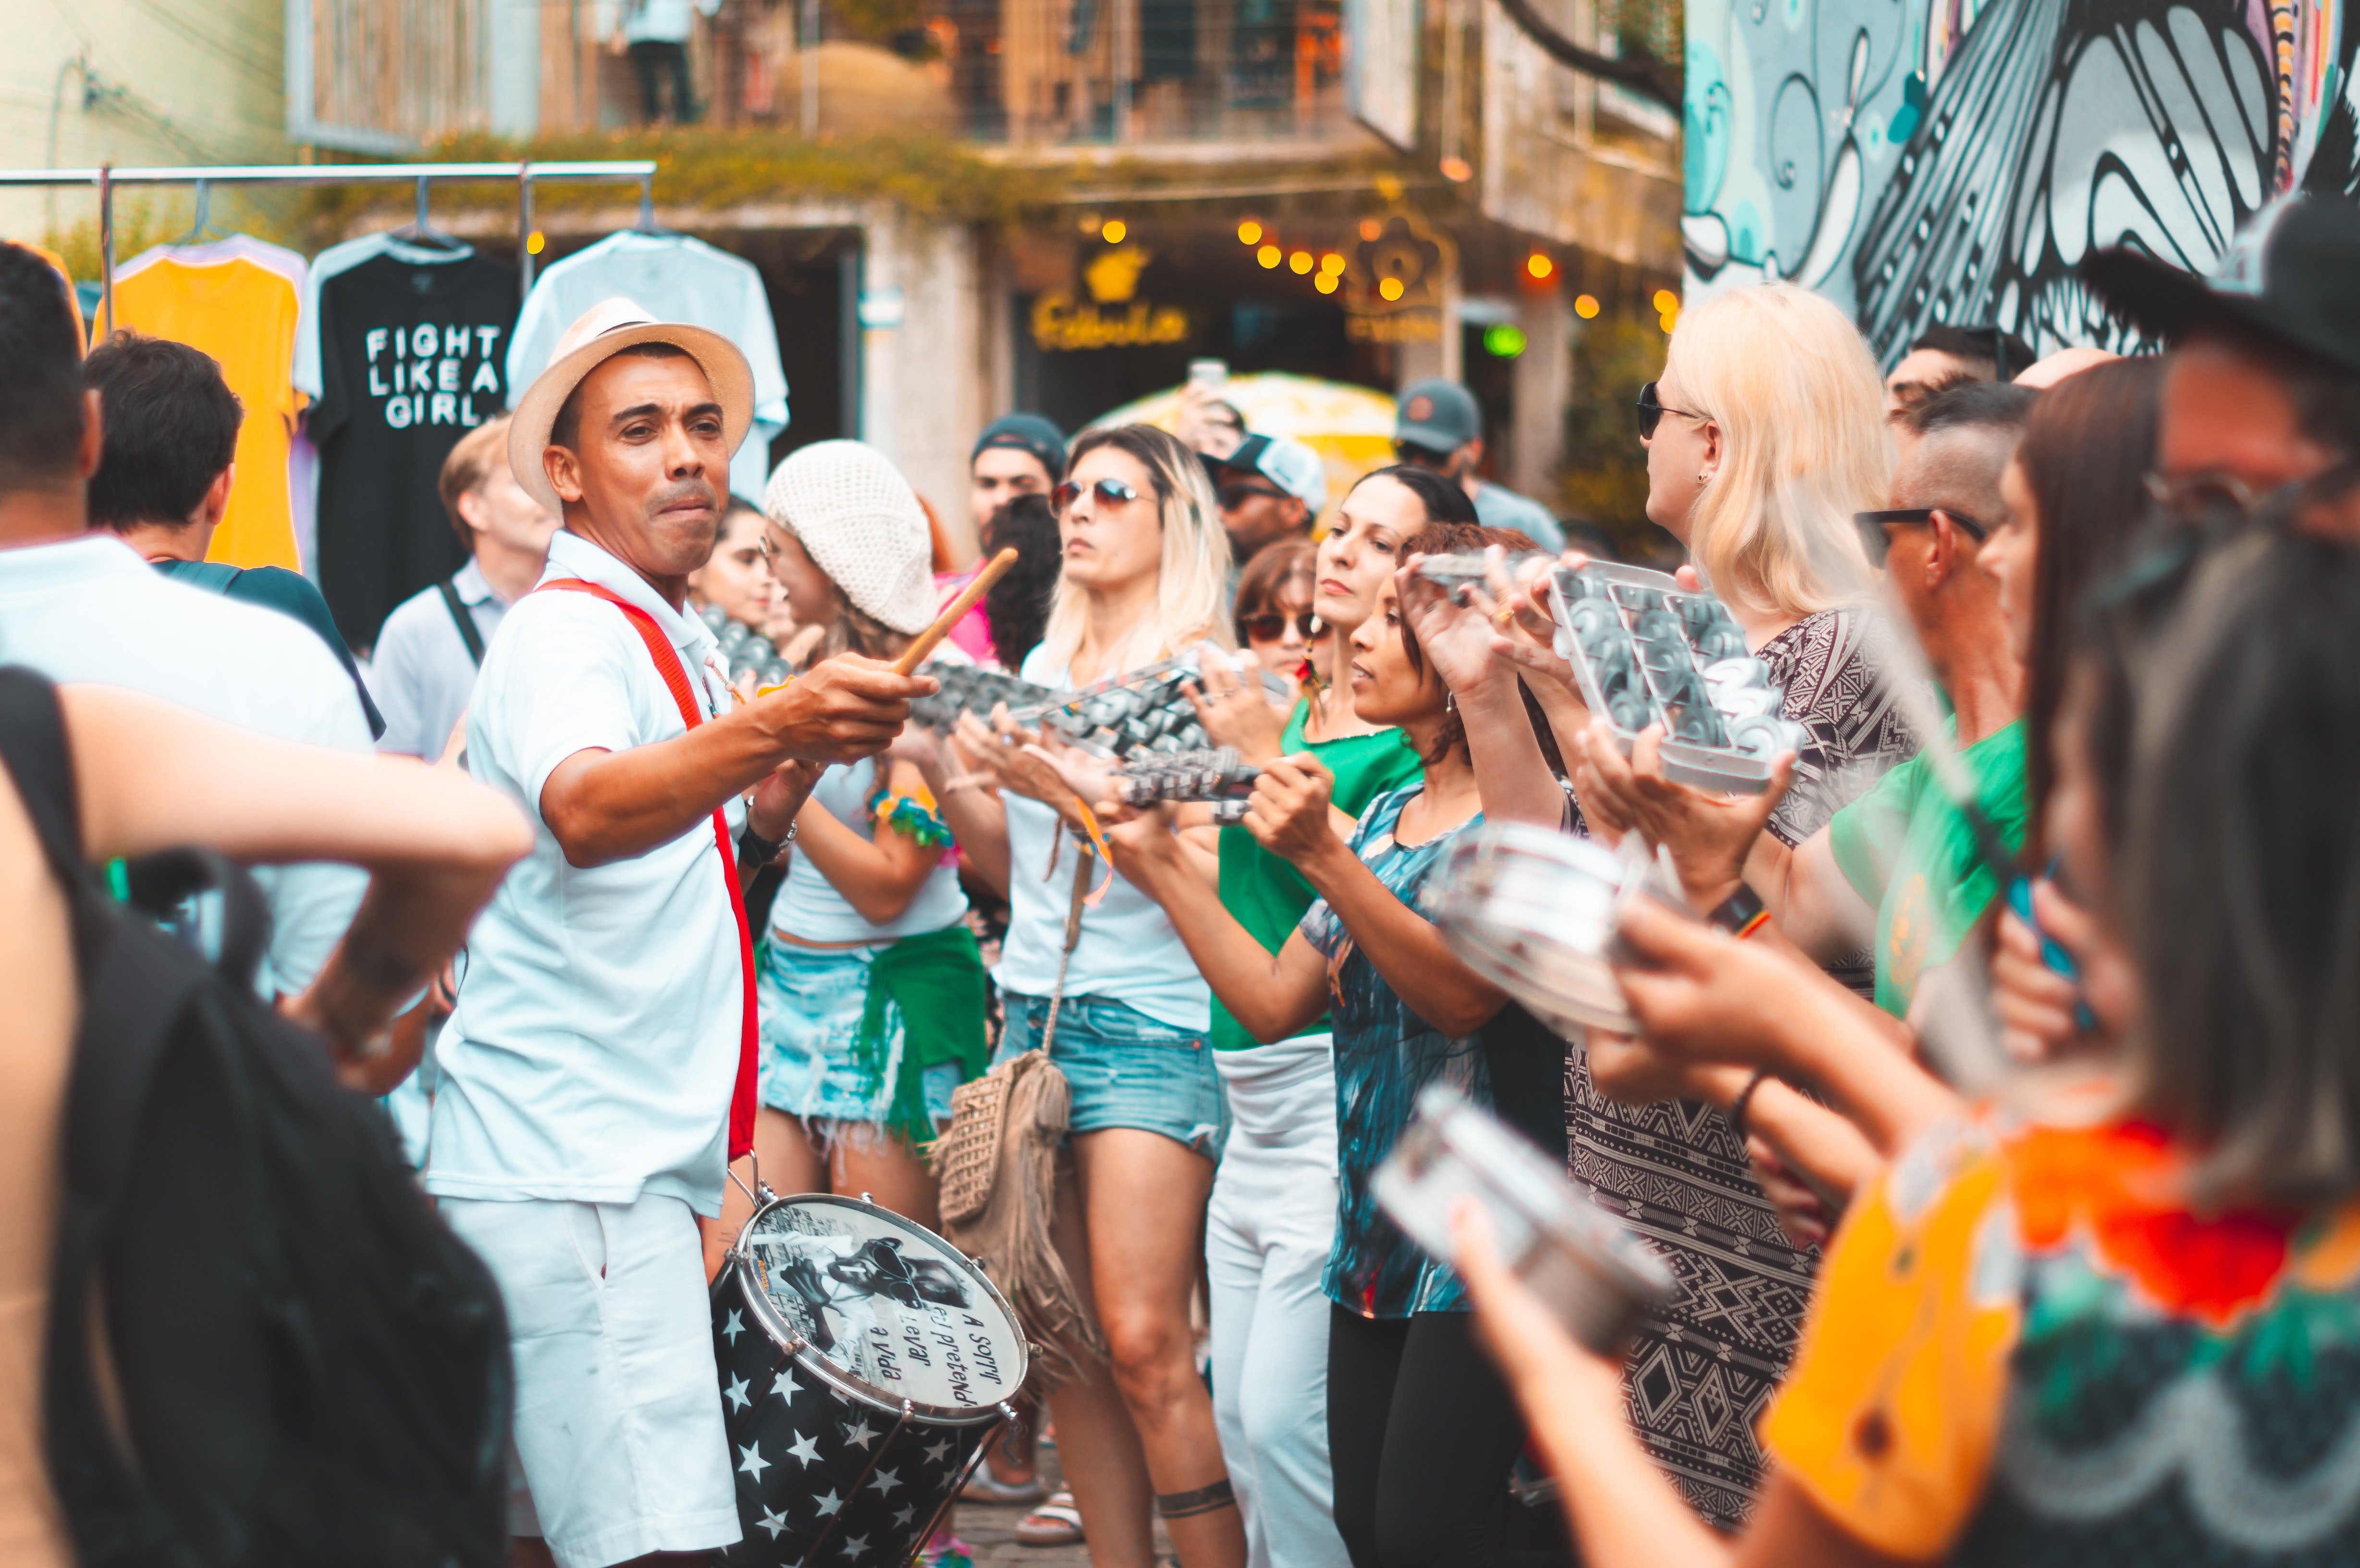 Photo of people having fun in a festival | Photo: Pexels